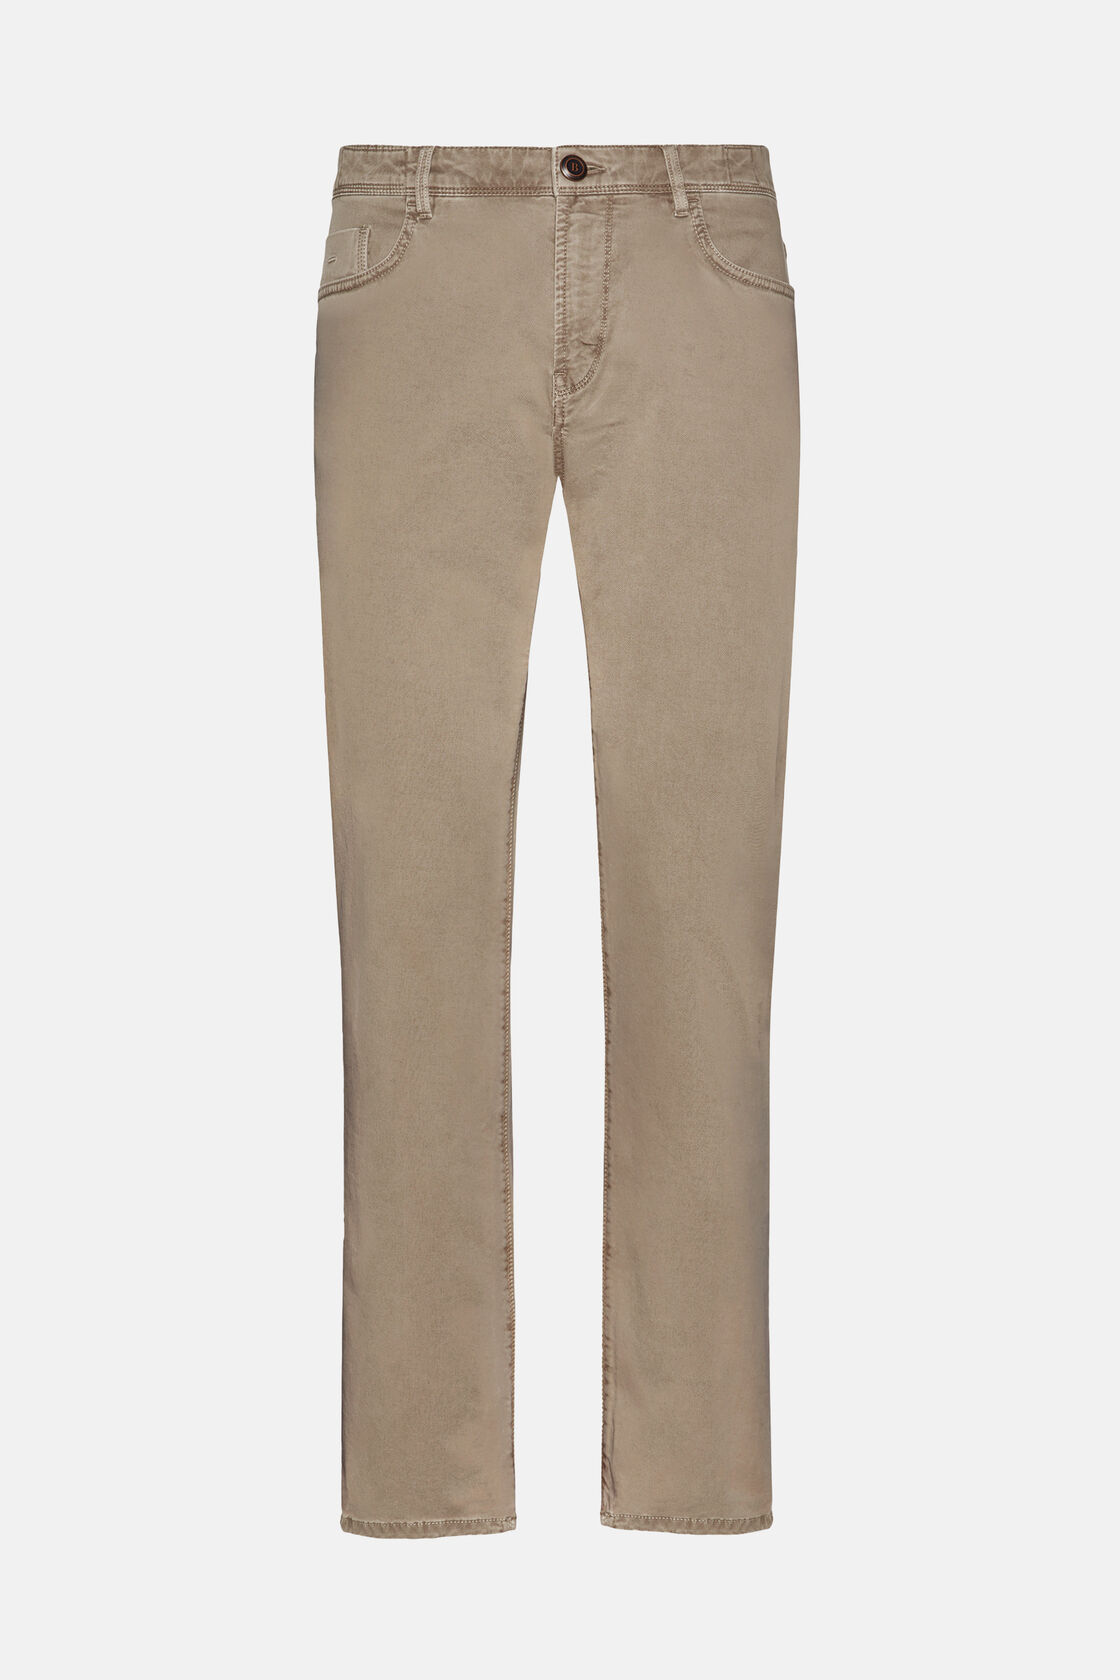 Stretch Cotton Jeans, Taupe, hi-res